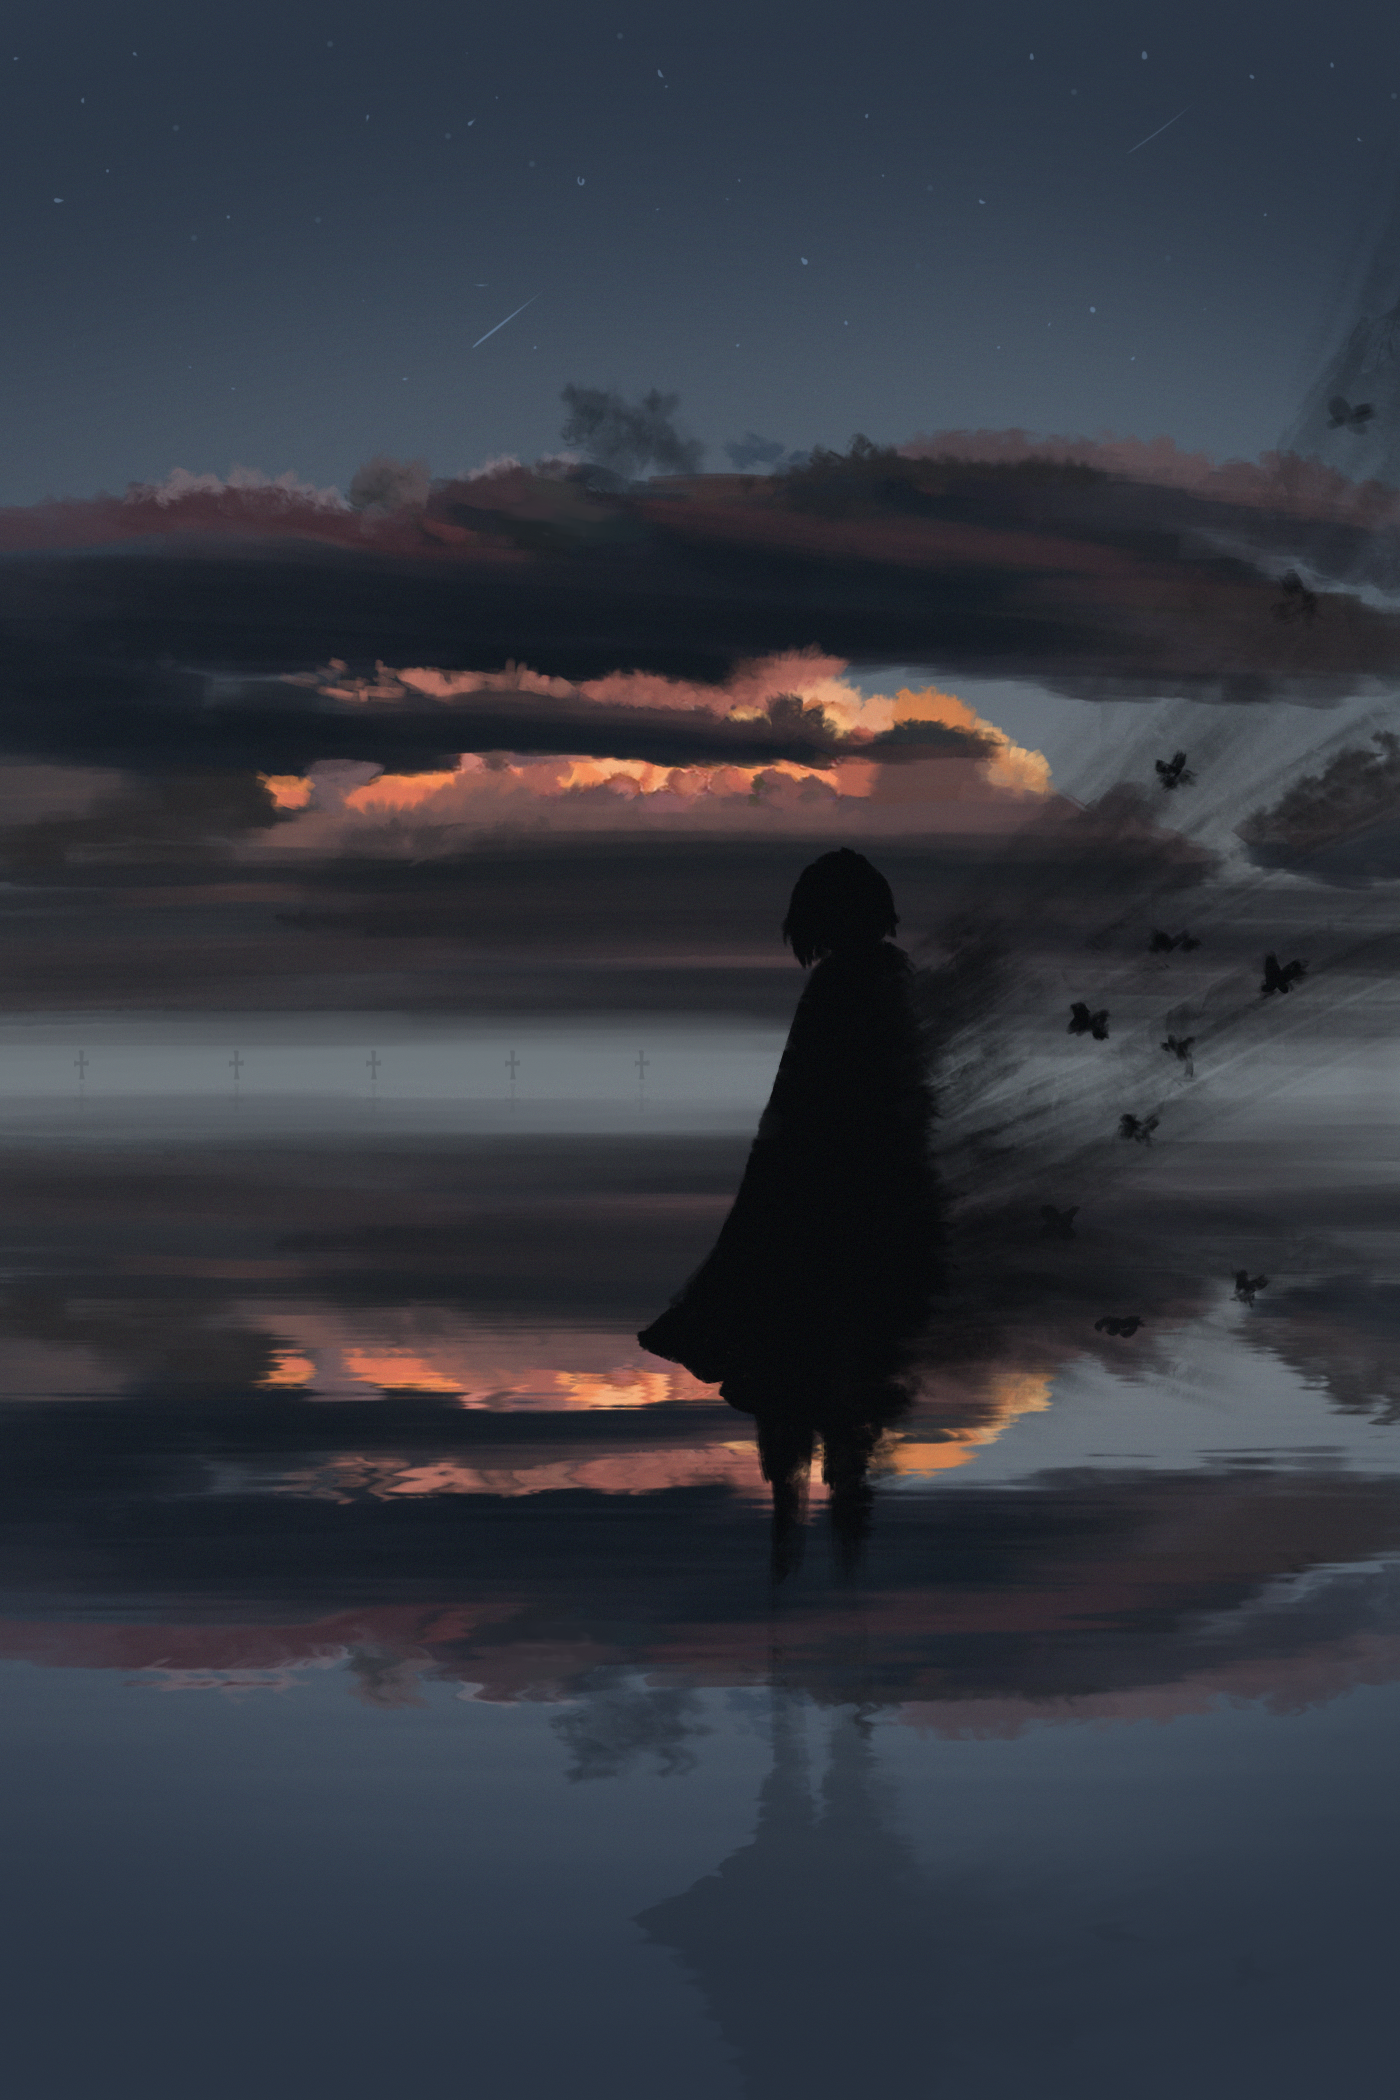 Anime 1400x2100 Yu jing illustration clouds sunset glow sunset starred sky water sky anime anime girls women outdoors standing silhouette alone reflection digital art